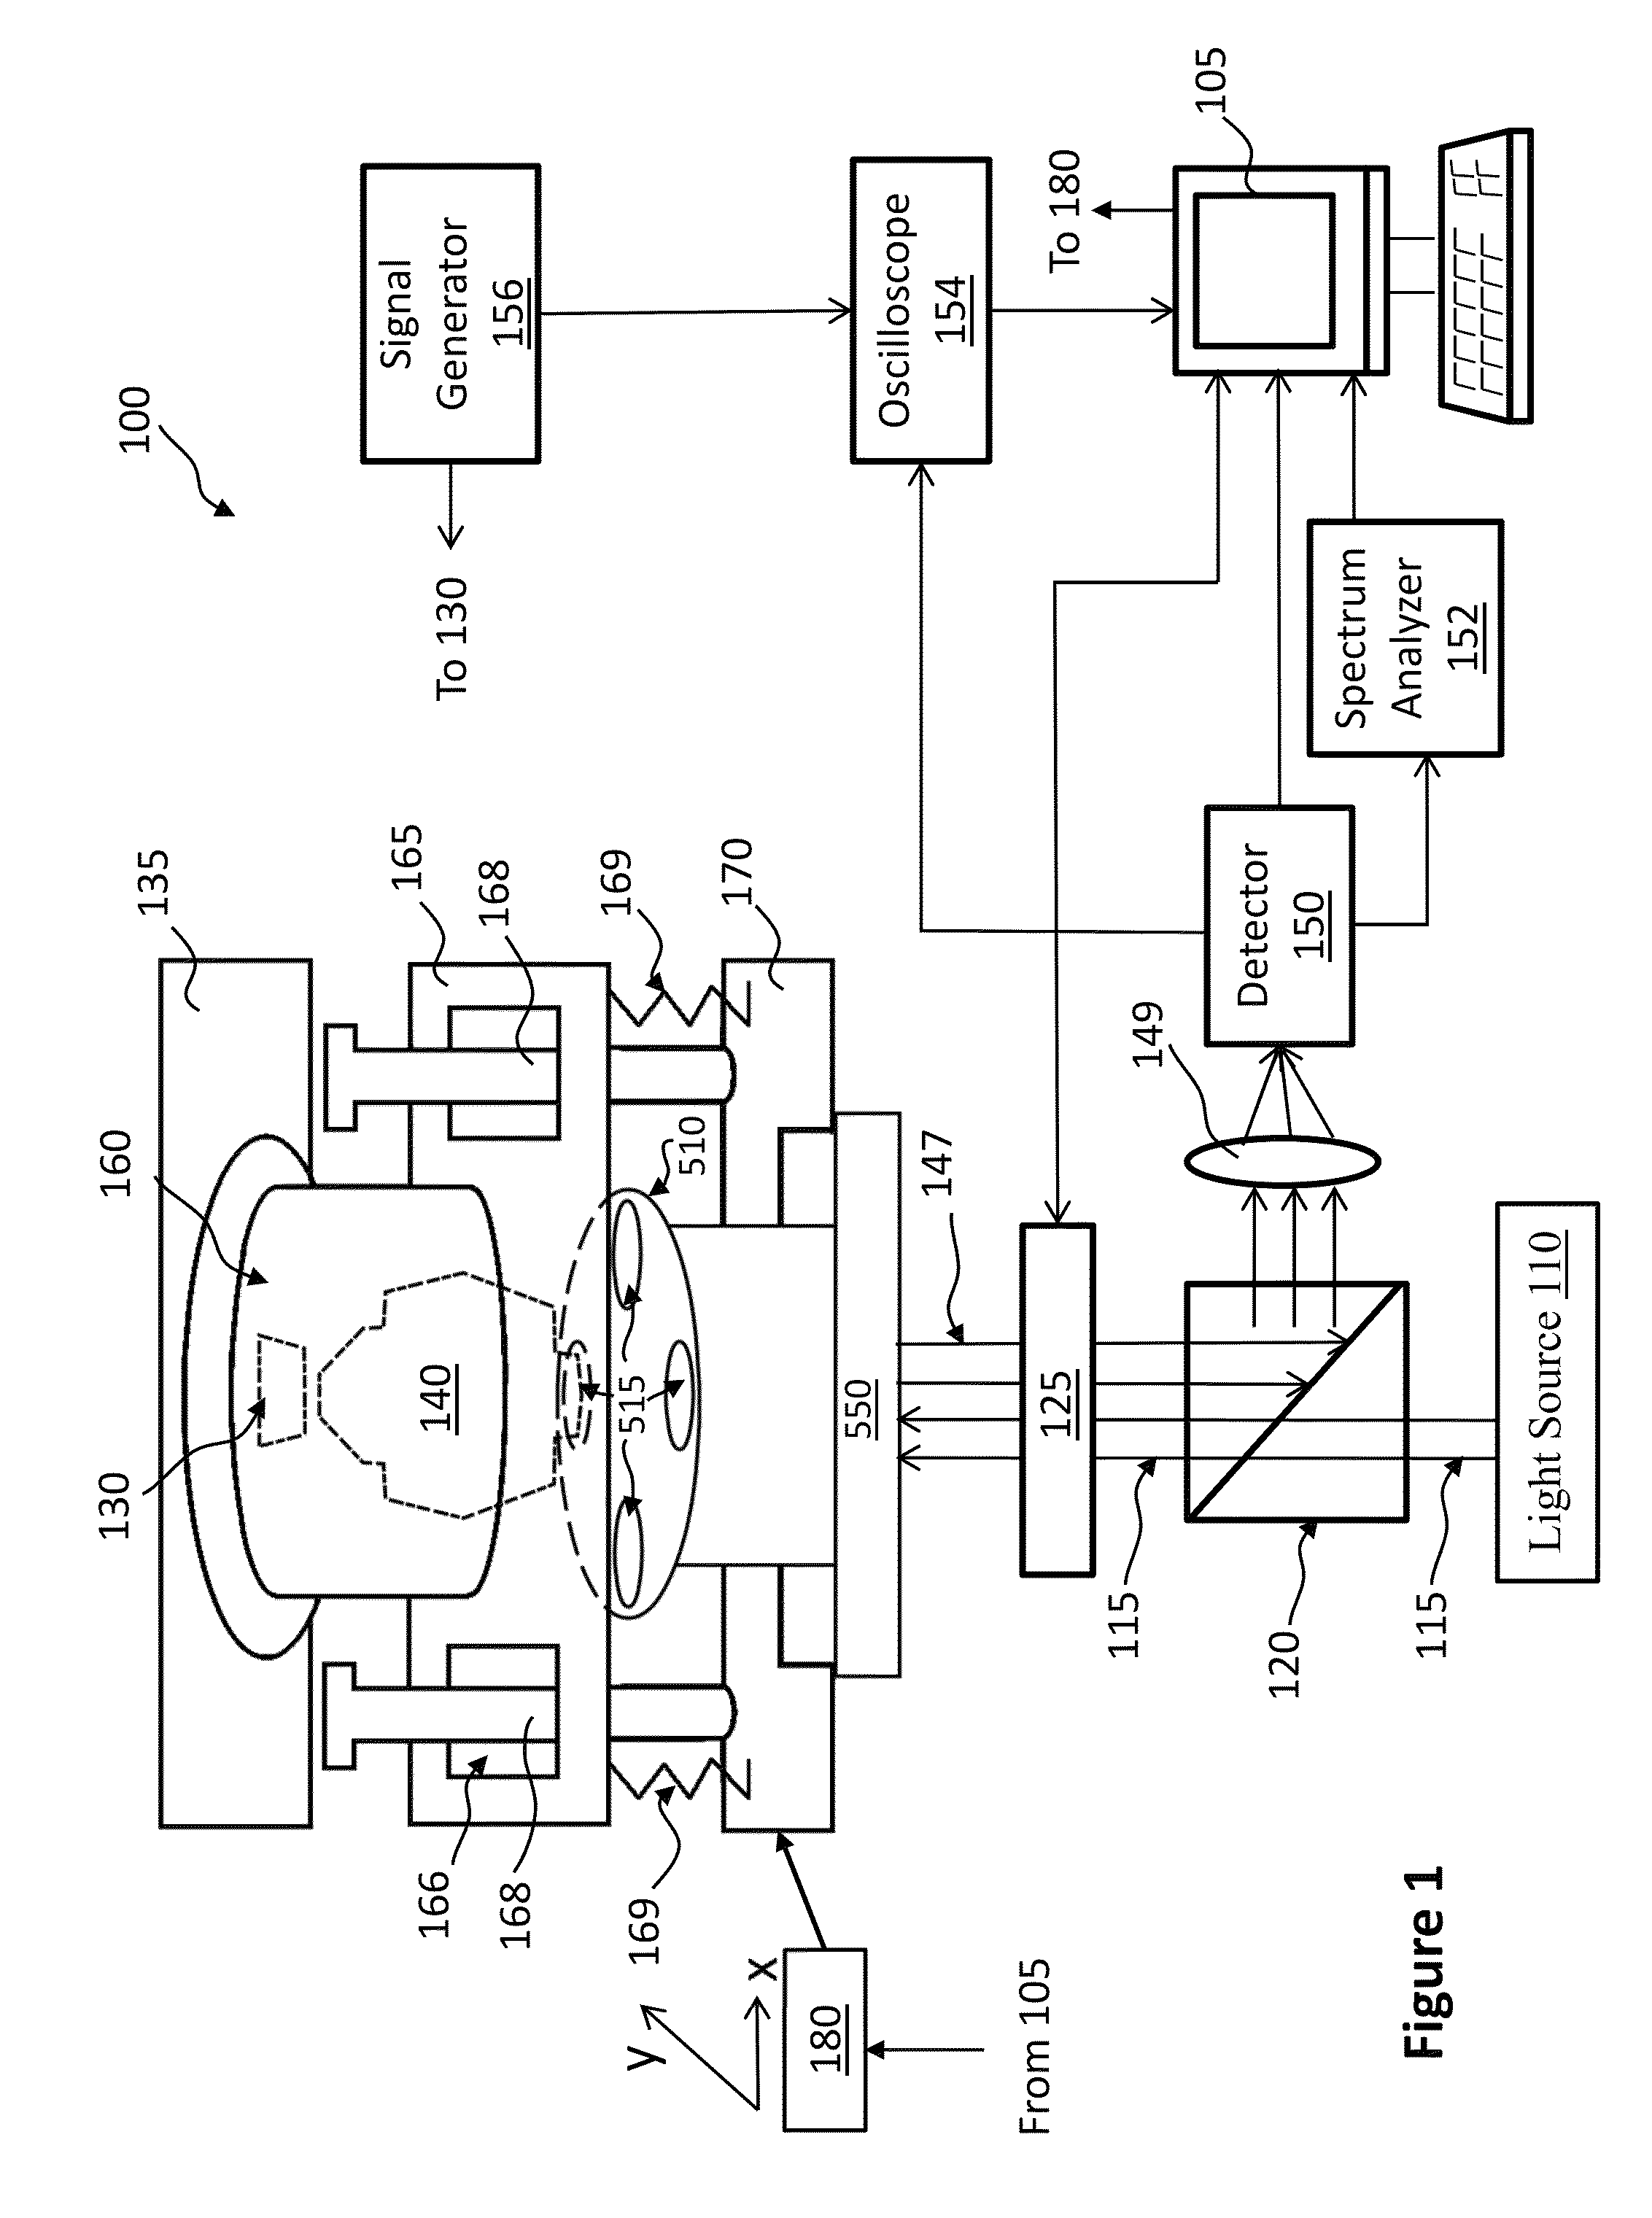 Multi-magnification high sensitivity optical system for probing electronic devices